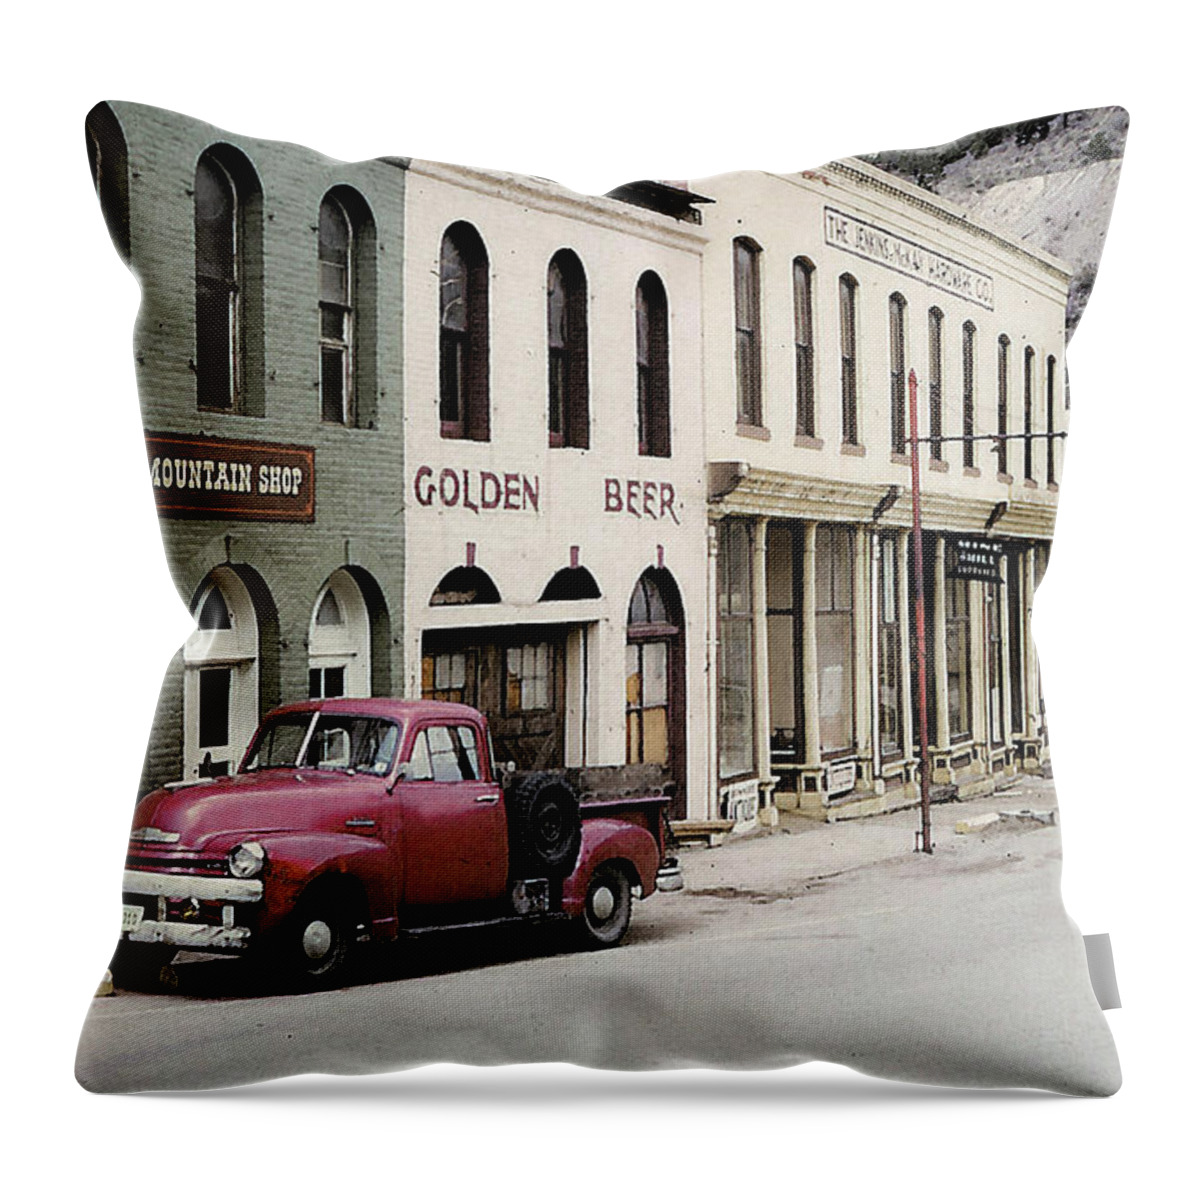 Old Truck Throw Pillow featuring the photograph Mountain Shop by Jim Mathis